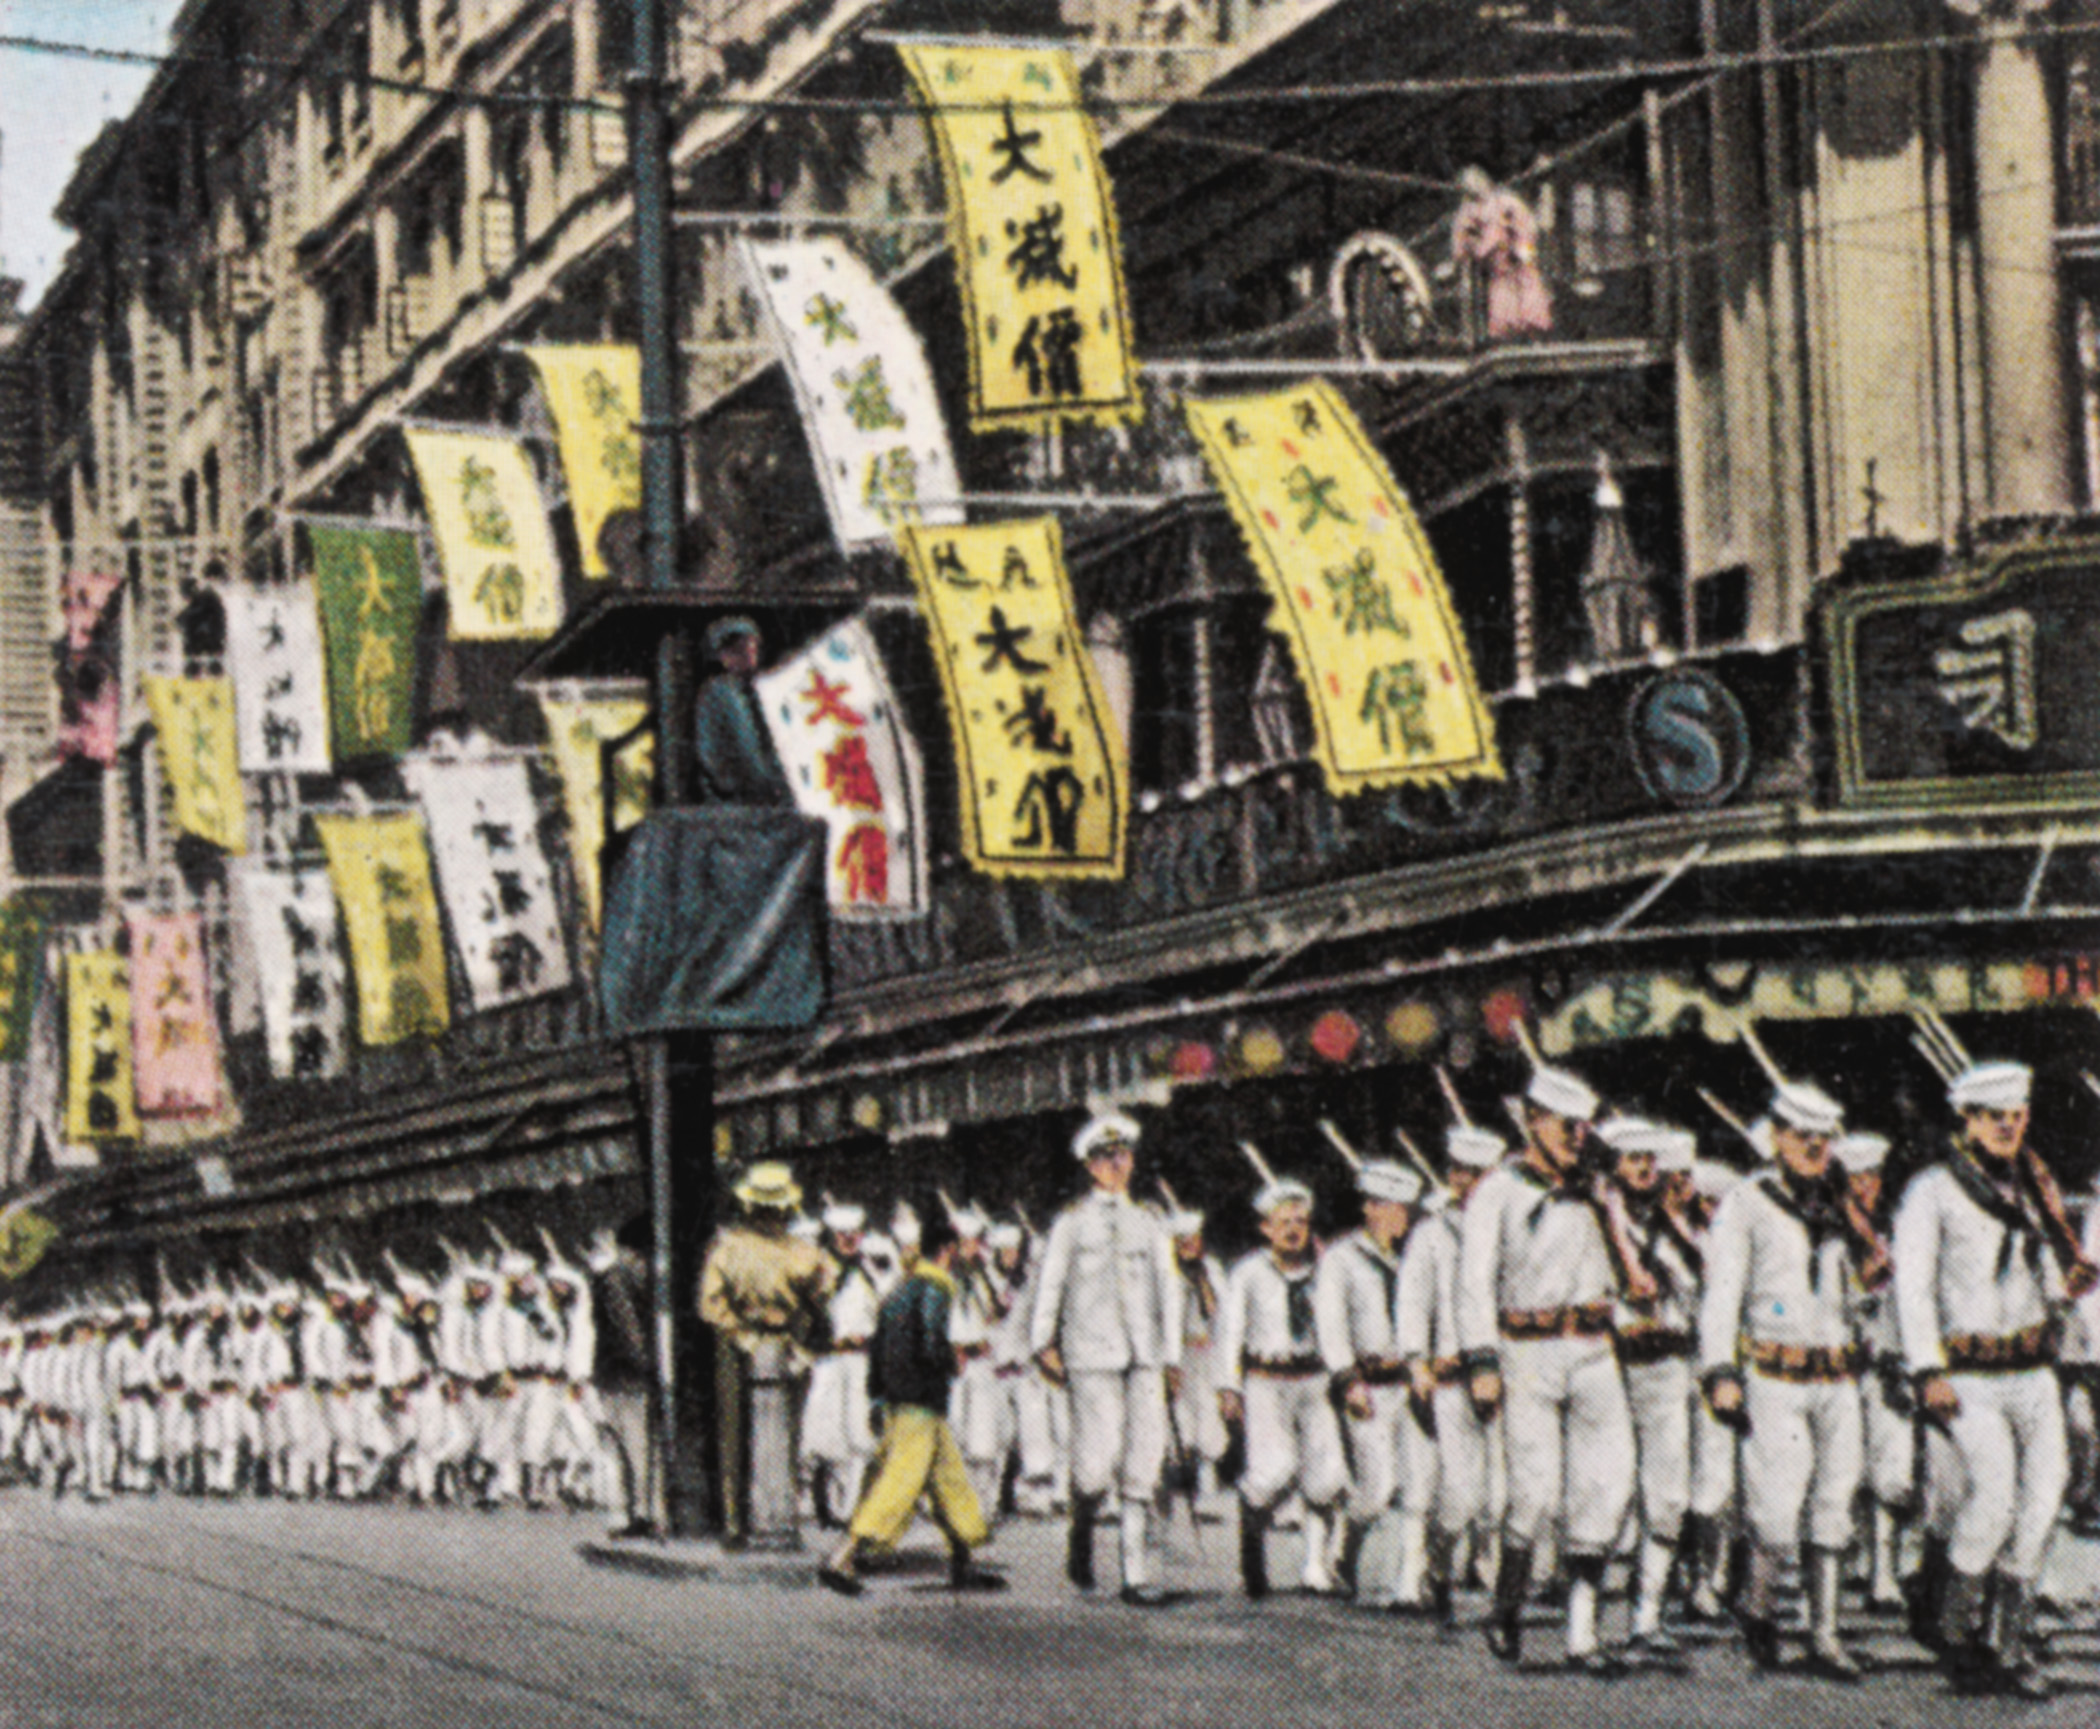 U.S. Navy sailors march down the streets of Shanghai. Such a show of force was occasionally necessary in order to discourage those who might interfere with the interests of U.S. and European nationals.